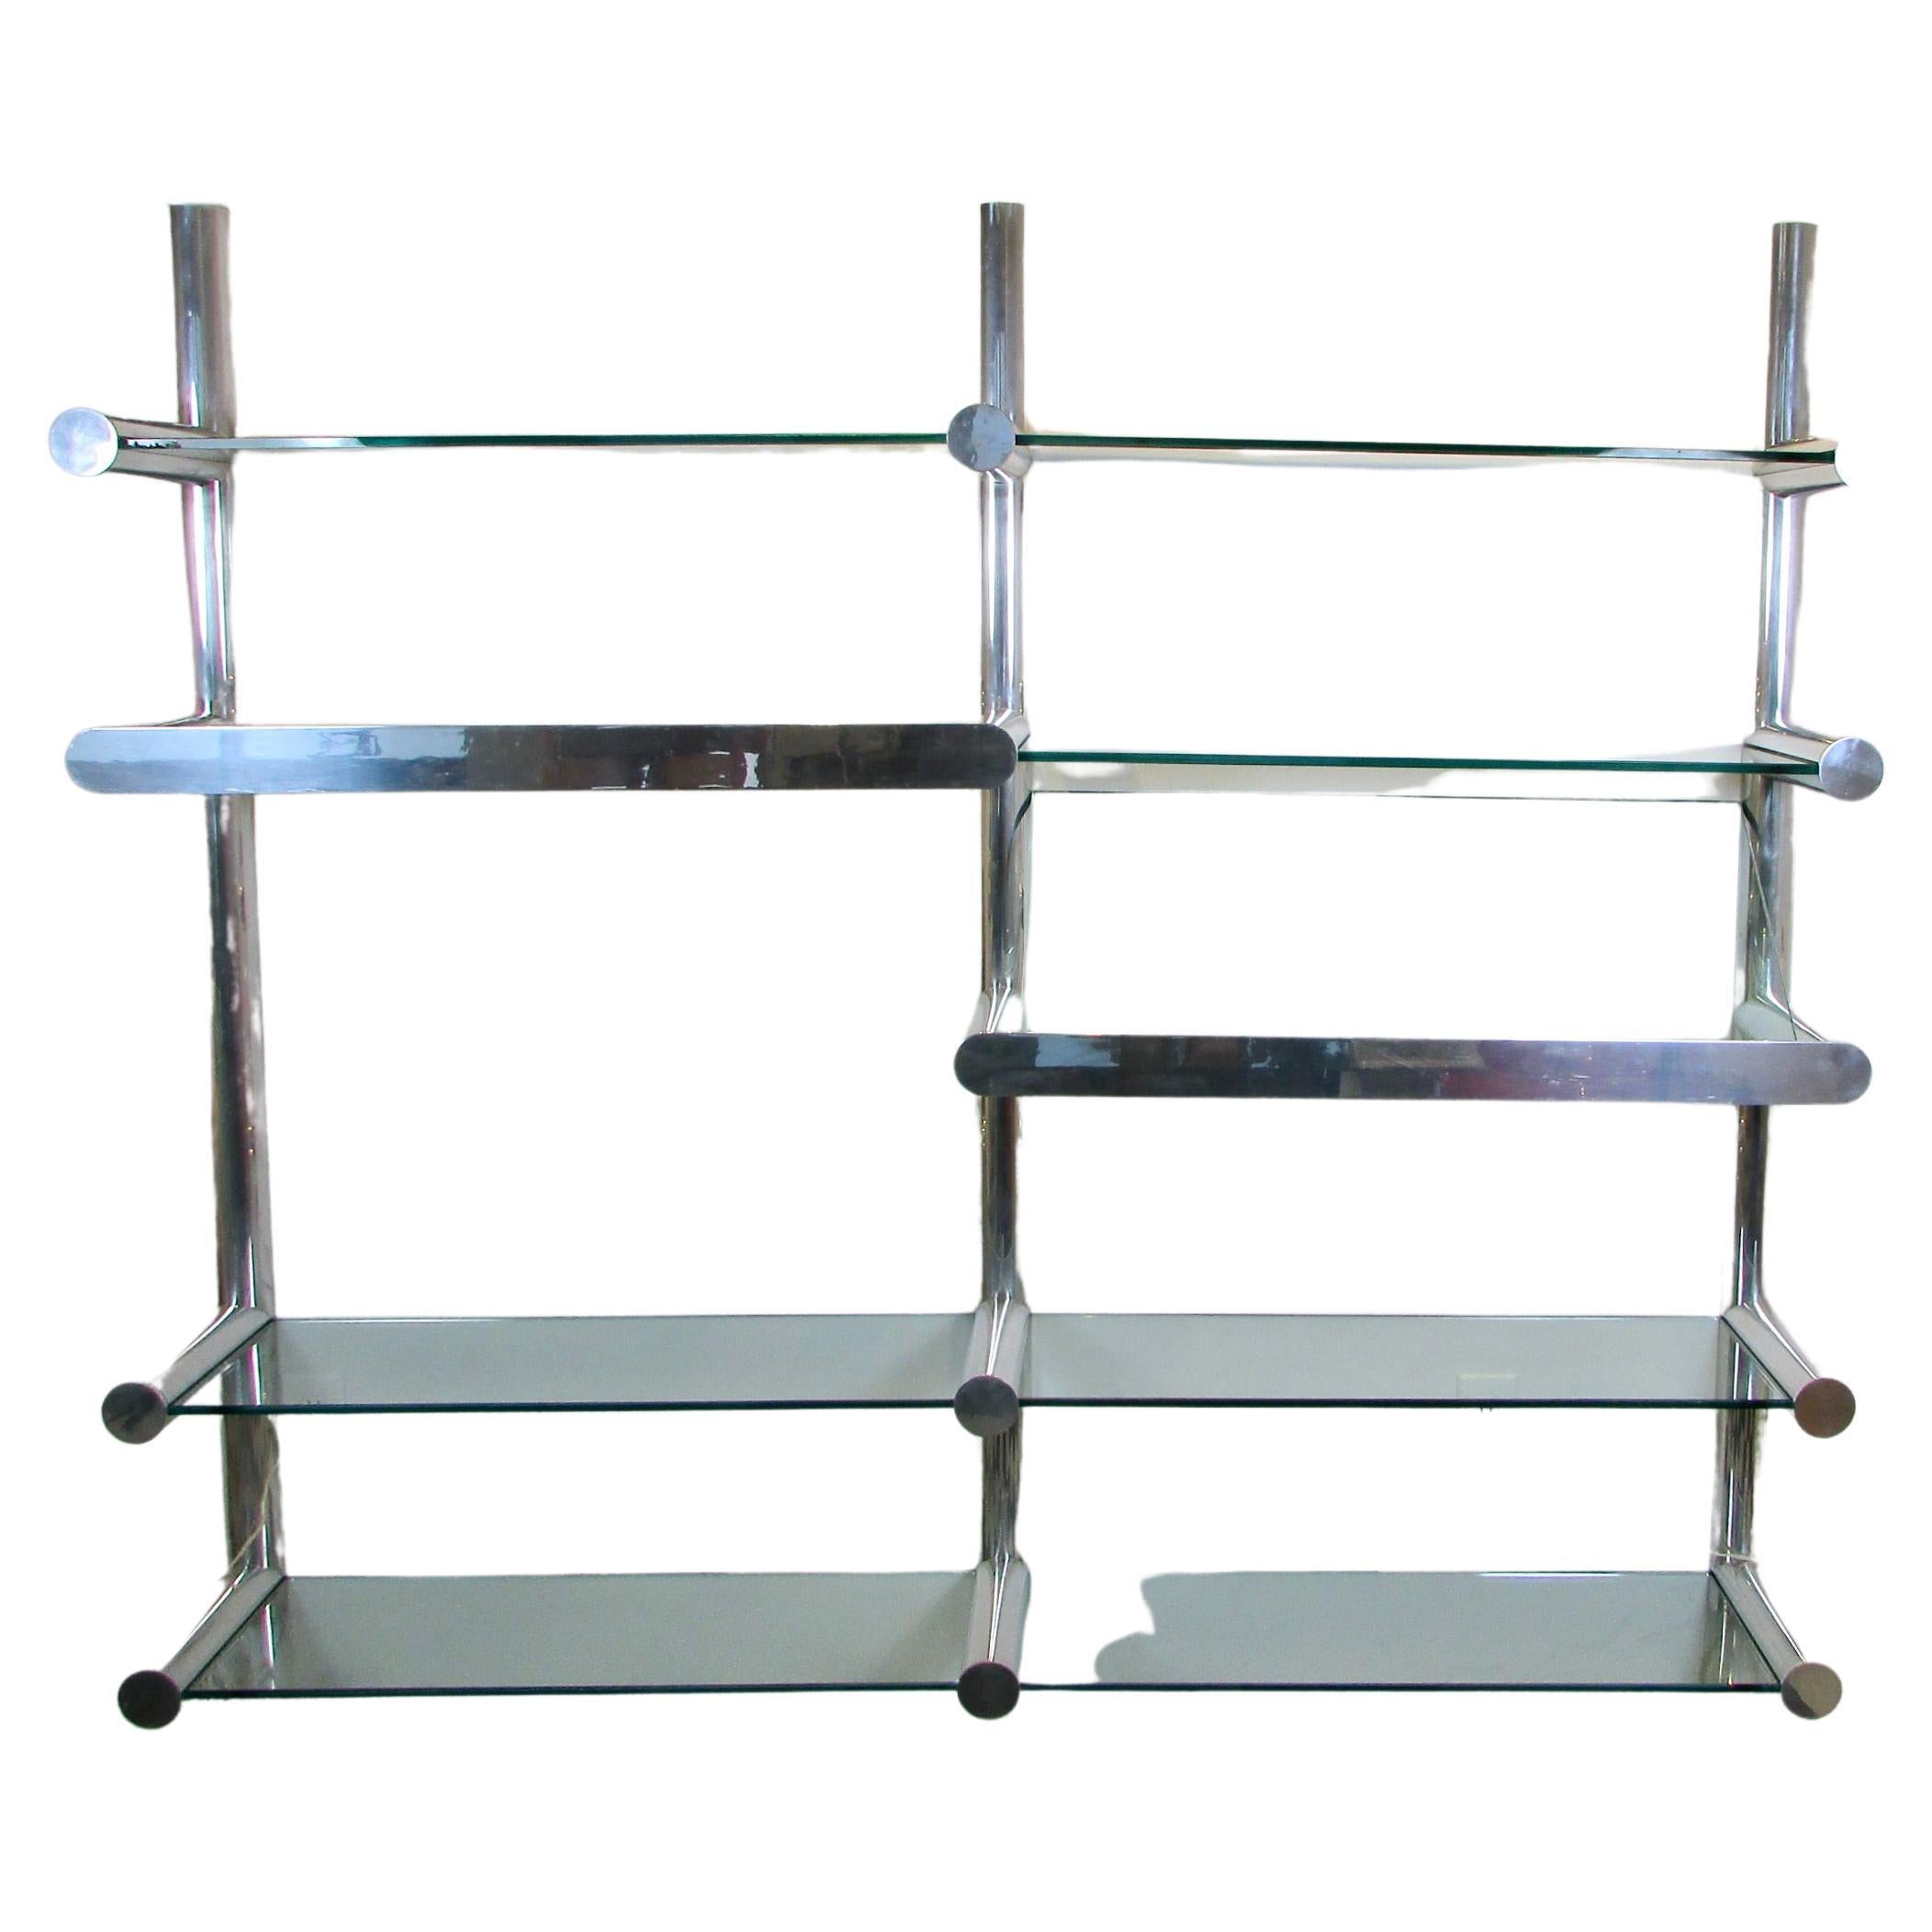 Janet Schweitzer for Pace Polished Aluminum Orba Wall Mount Shelving System